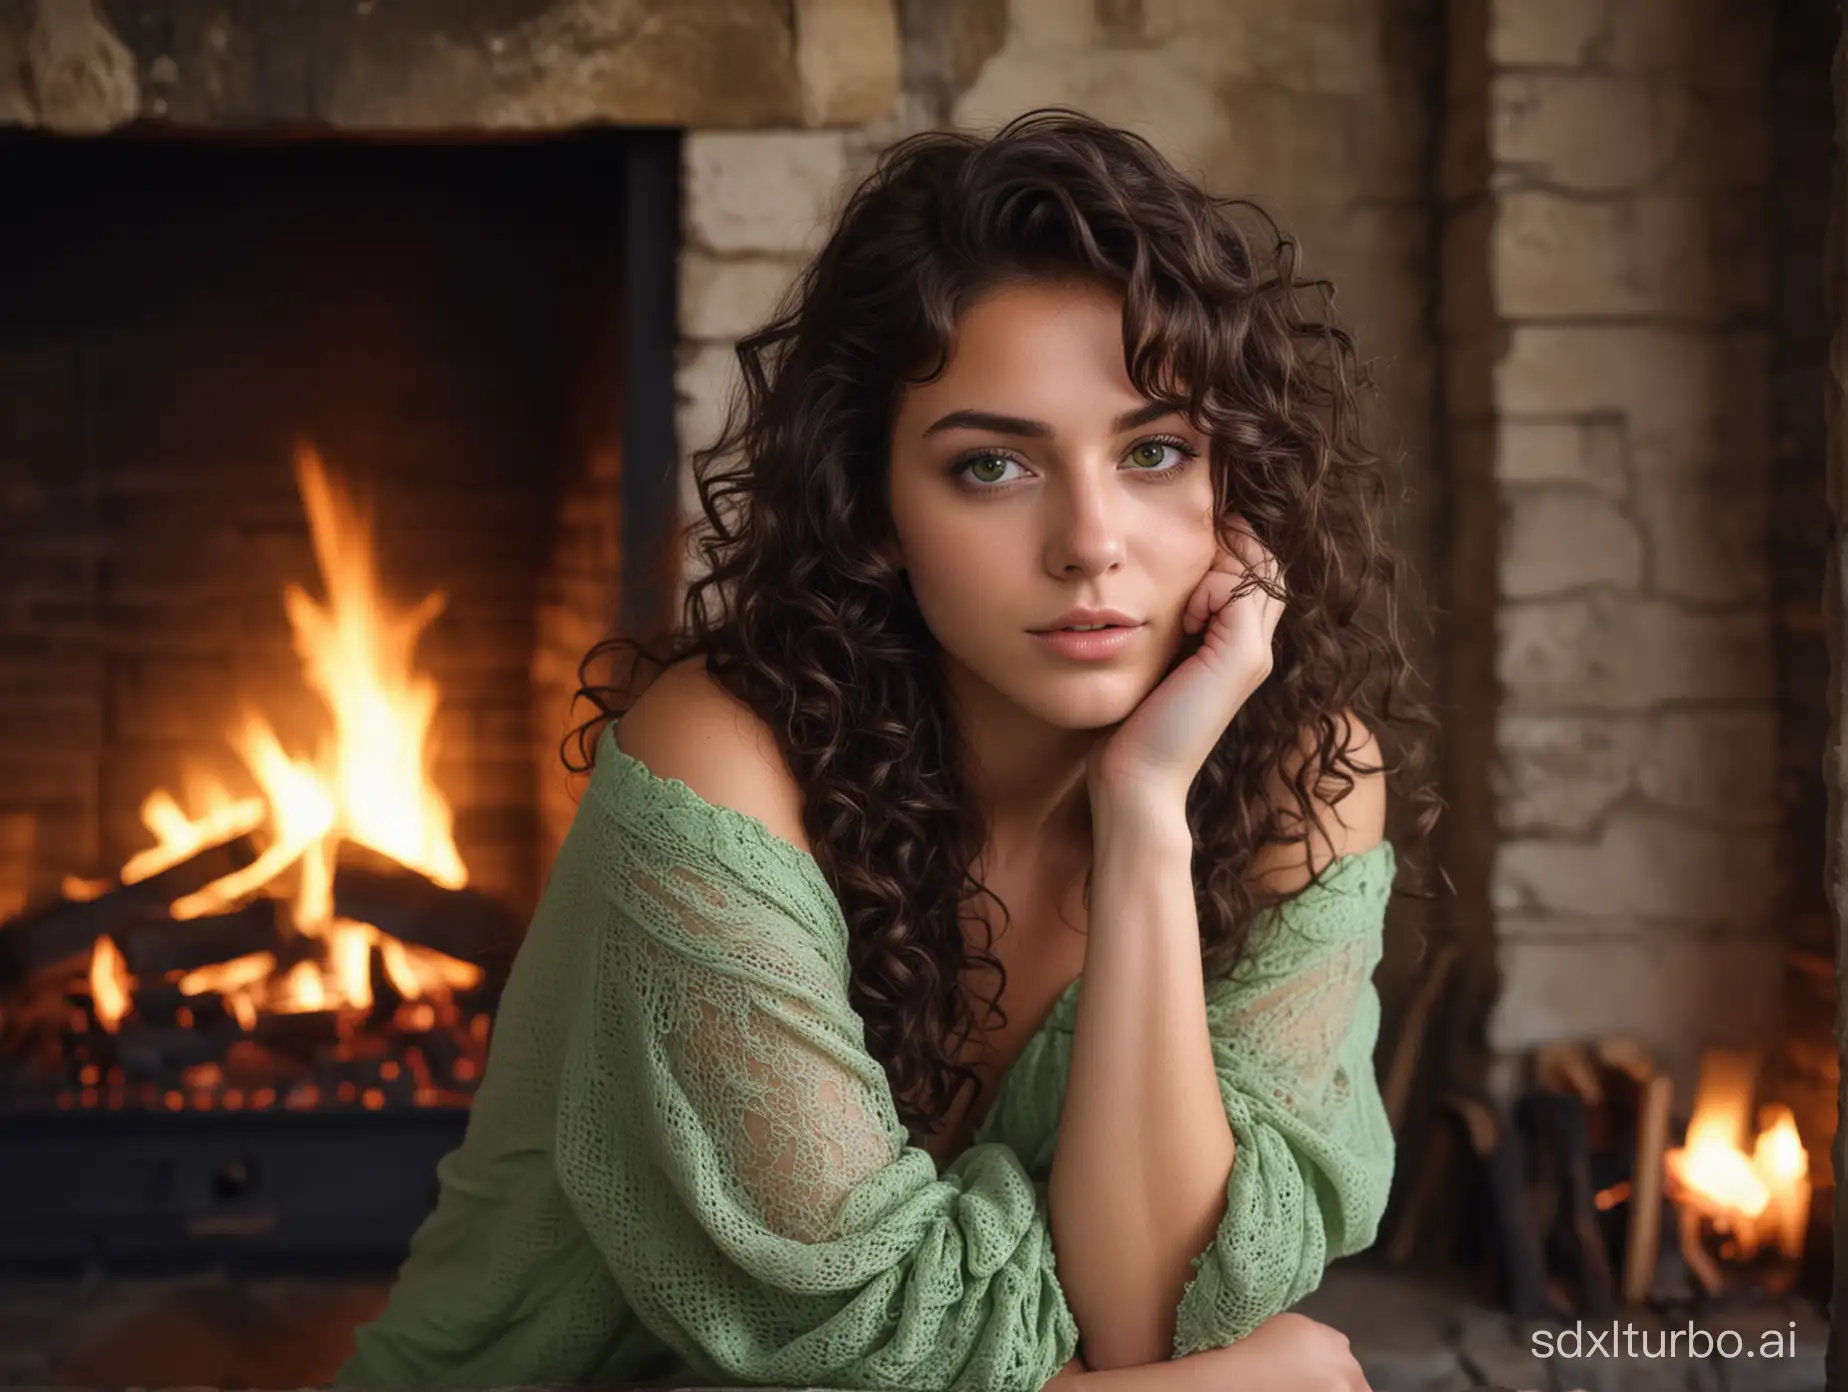 Beautiful girl 22 years old, green eyes sitting in front of a fire place at the old house black curly hairs body transparent clothes naked dreamy atmosphere,